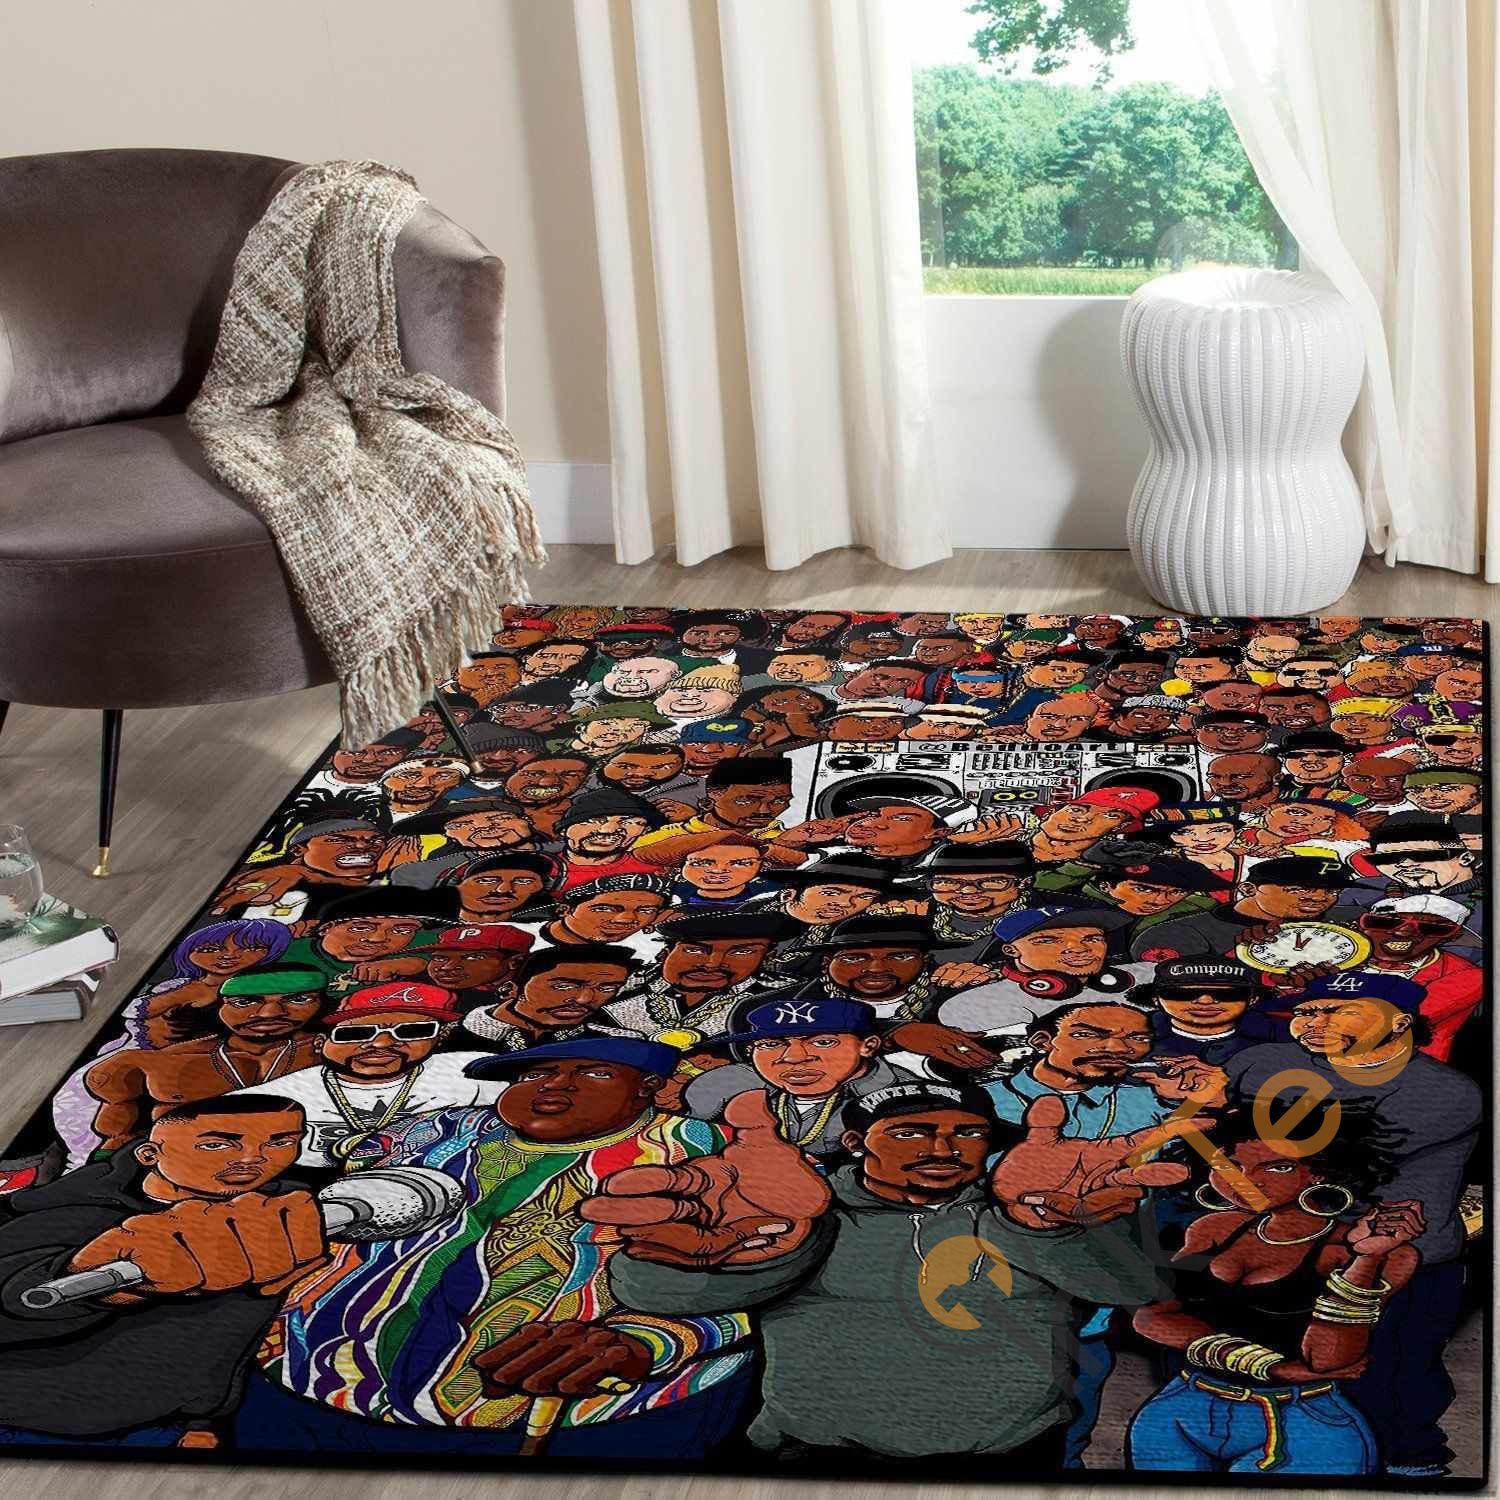 Step into the Pokémon World: Gengar-shaped Rugs for Ultimate Fan Comfort